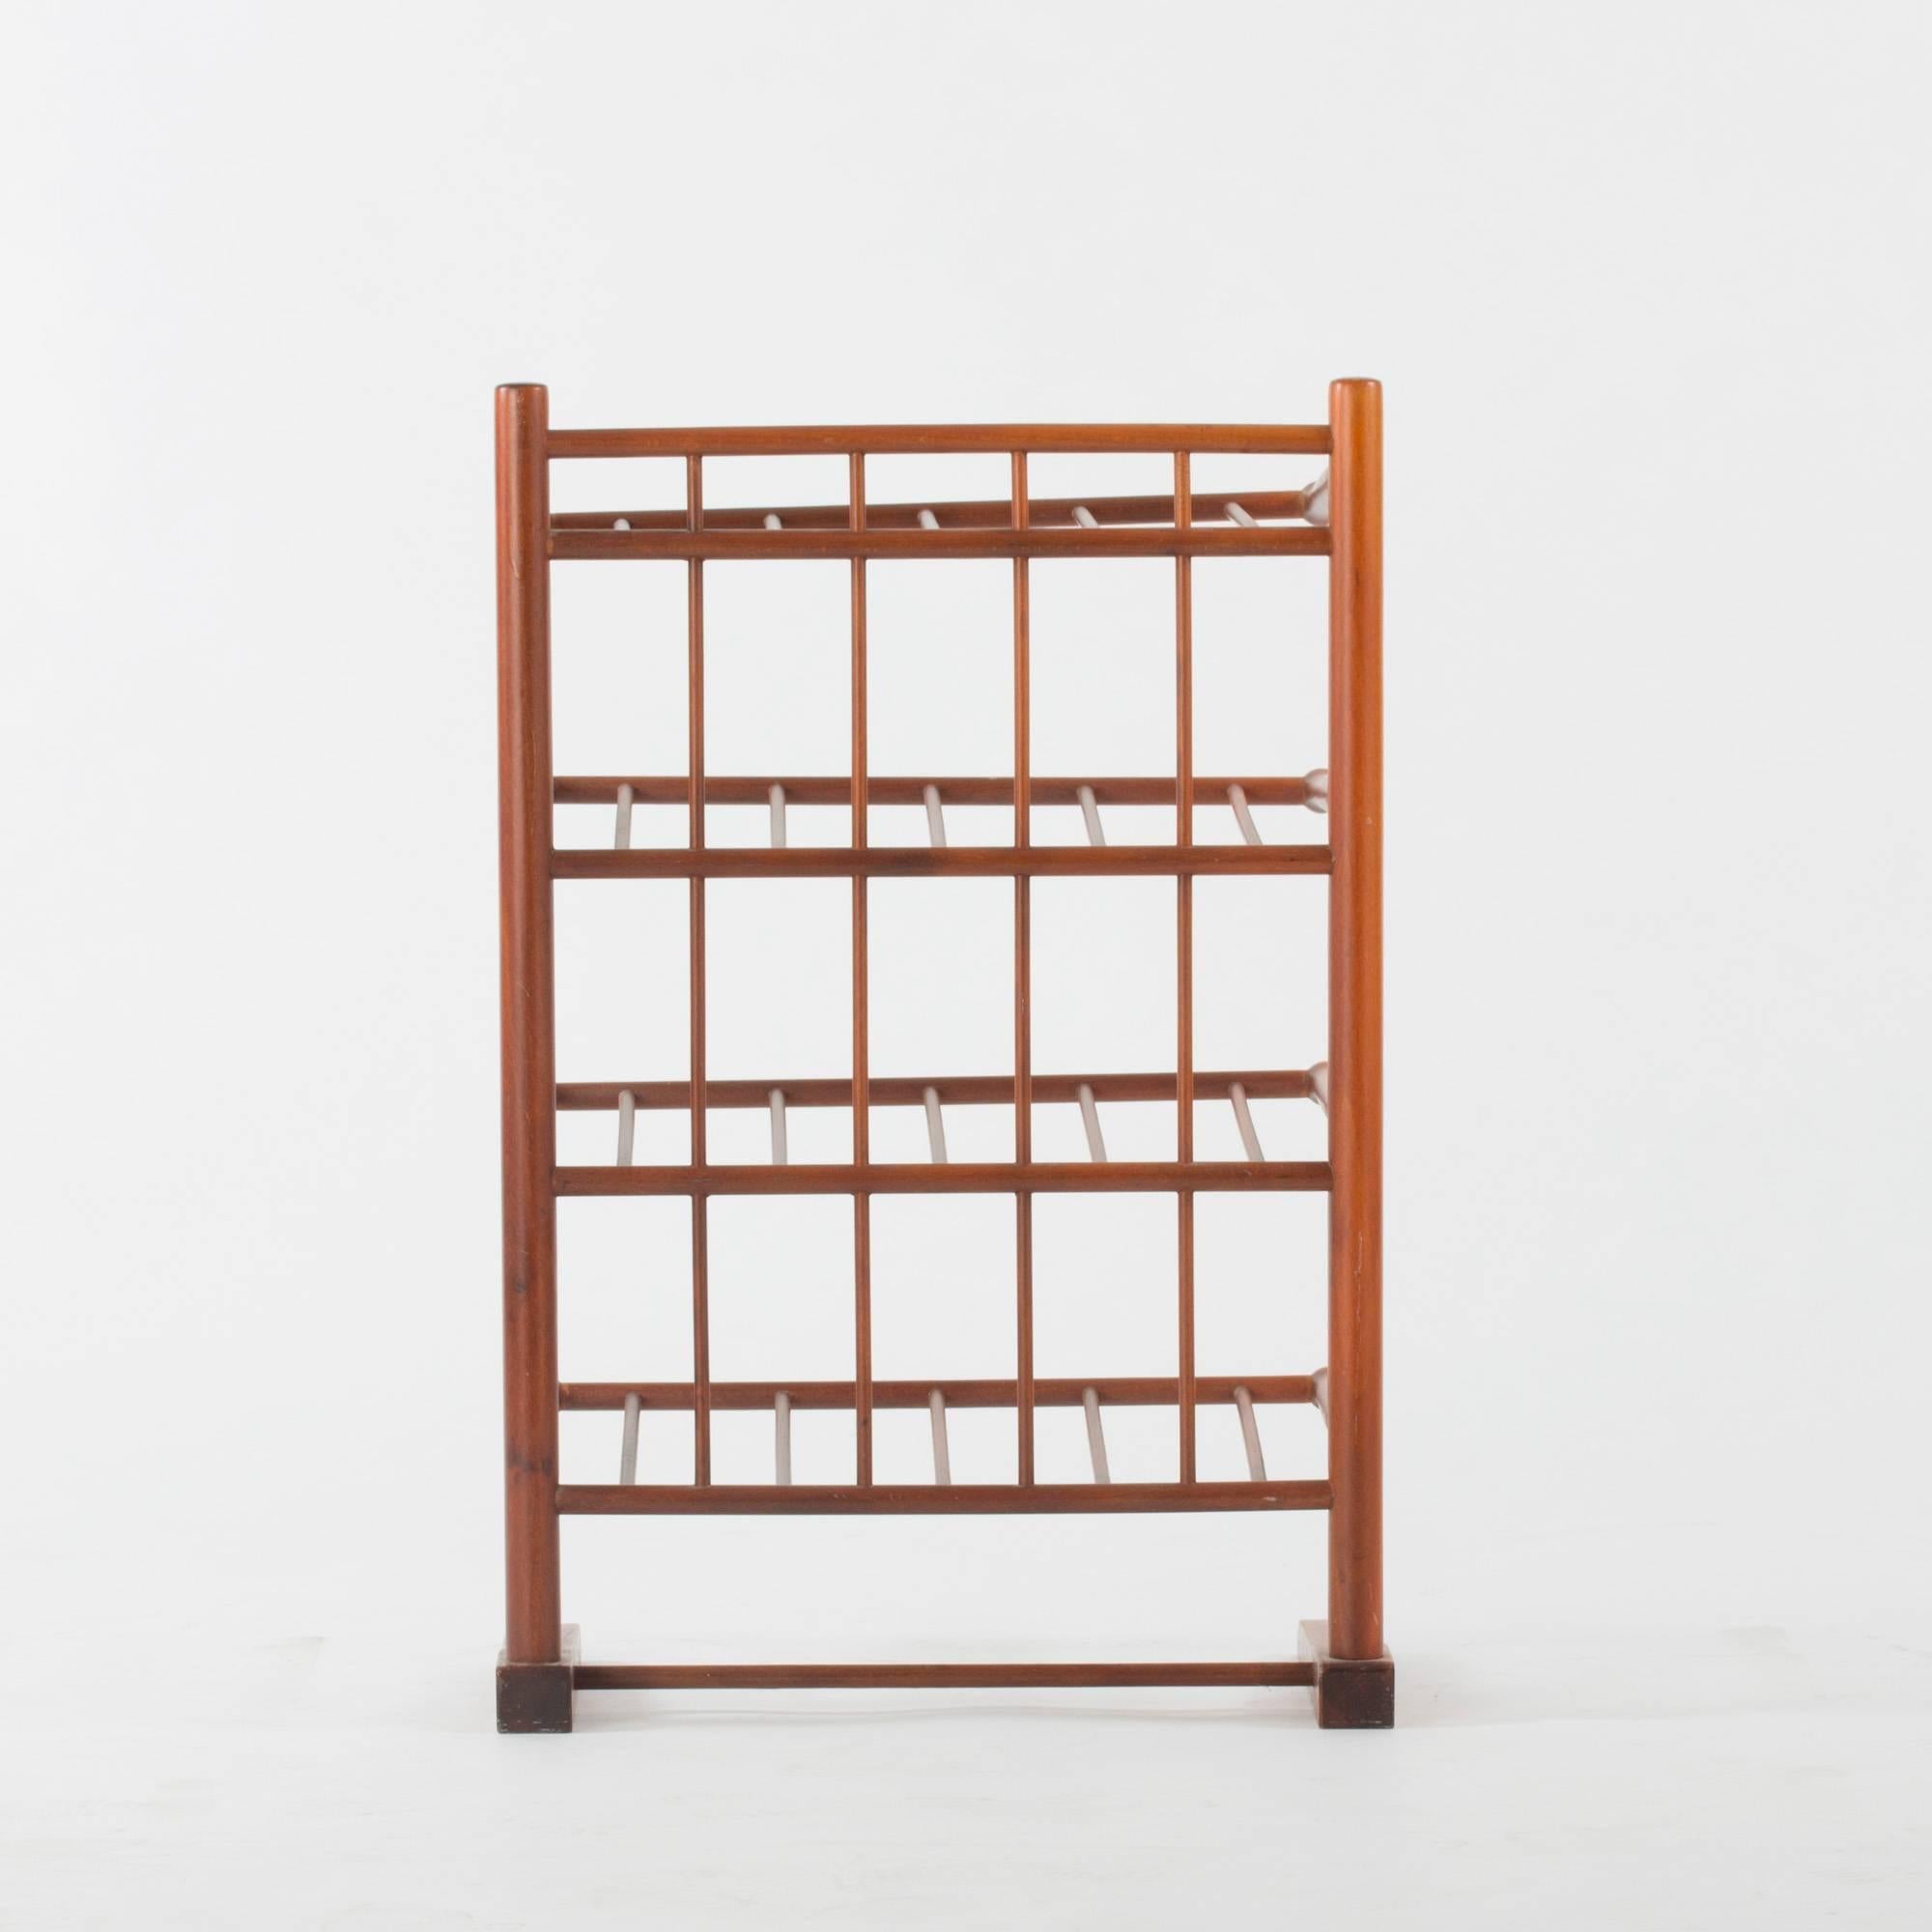 Elegant, airy mahogany book or magazine Stand, in all likelihood designed by Josef Frank for Svenskt Tenn. Can be placed on the floor or on a desk.